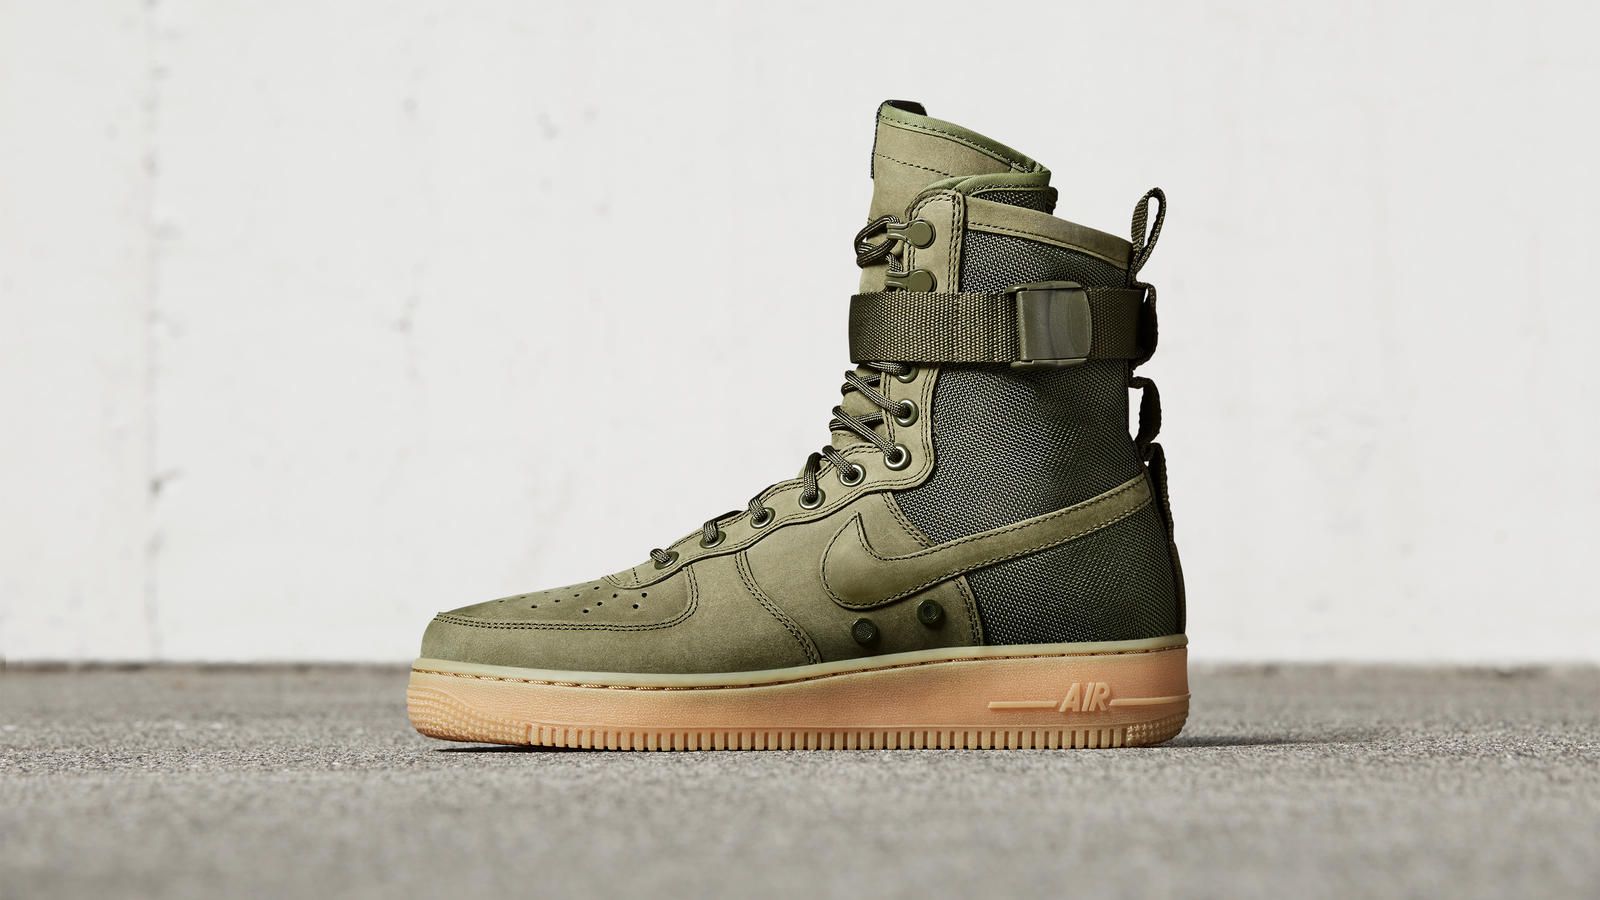 Nike Special Field Air Force Foot High